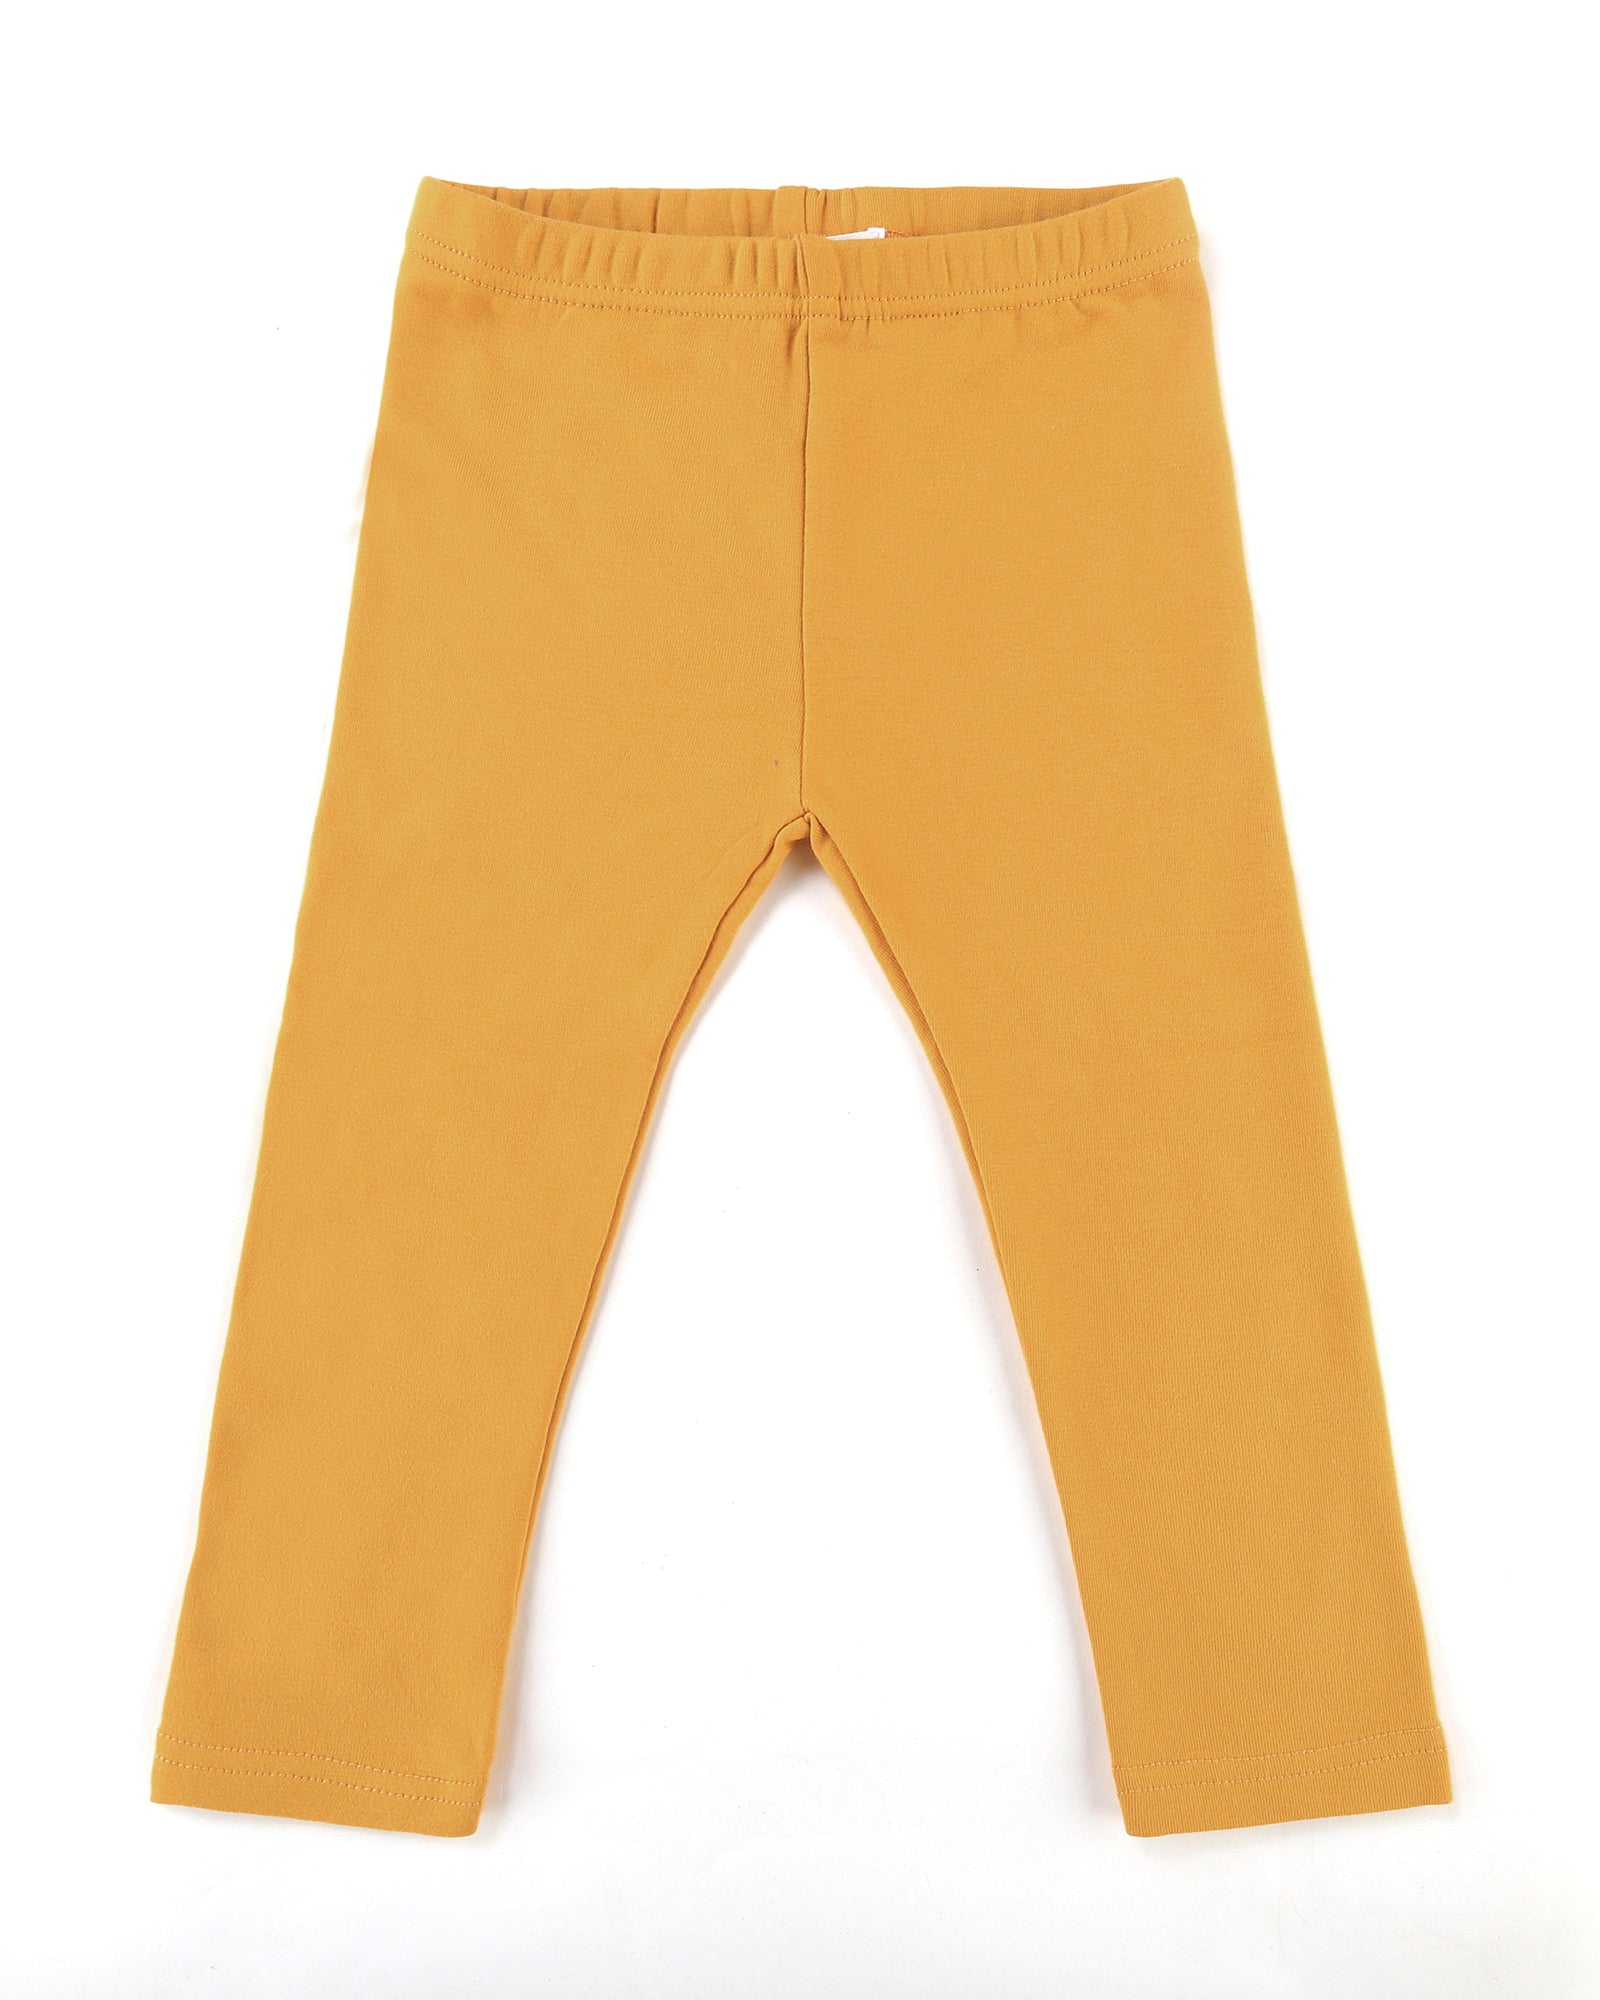 Here to stay Leggings in Mustard Front